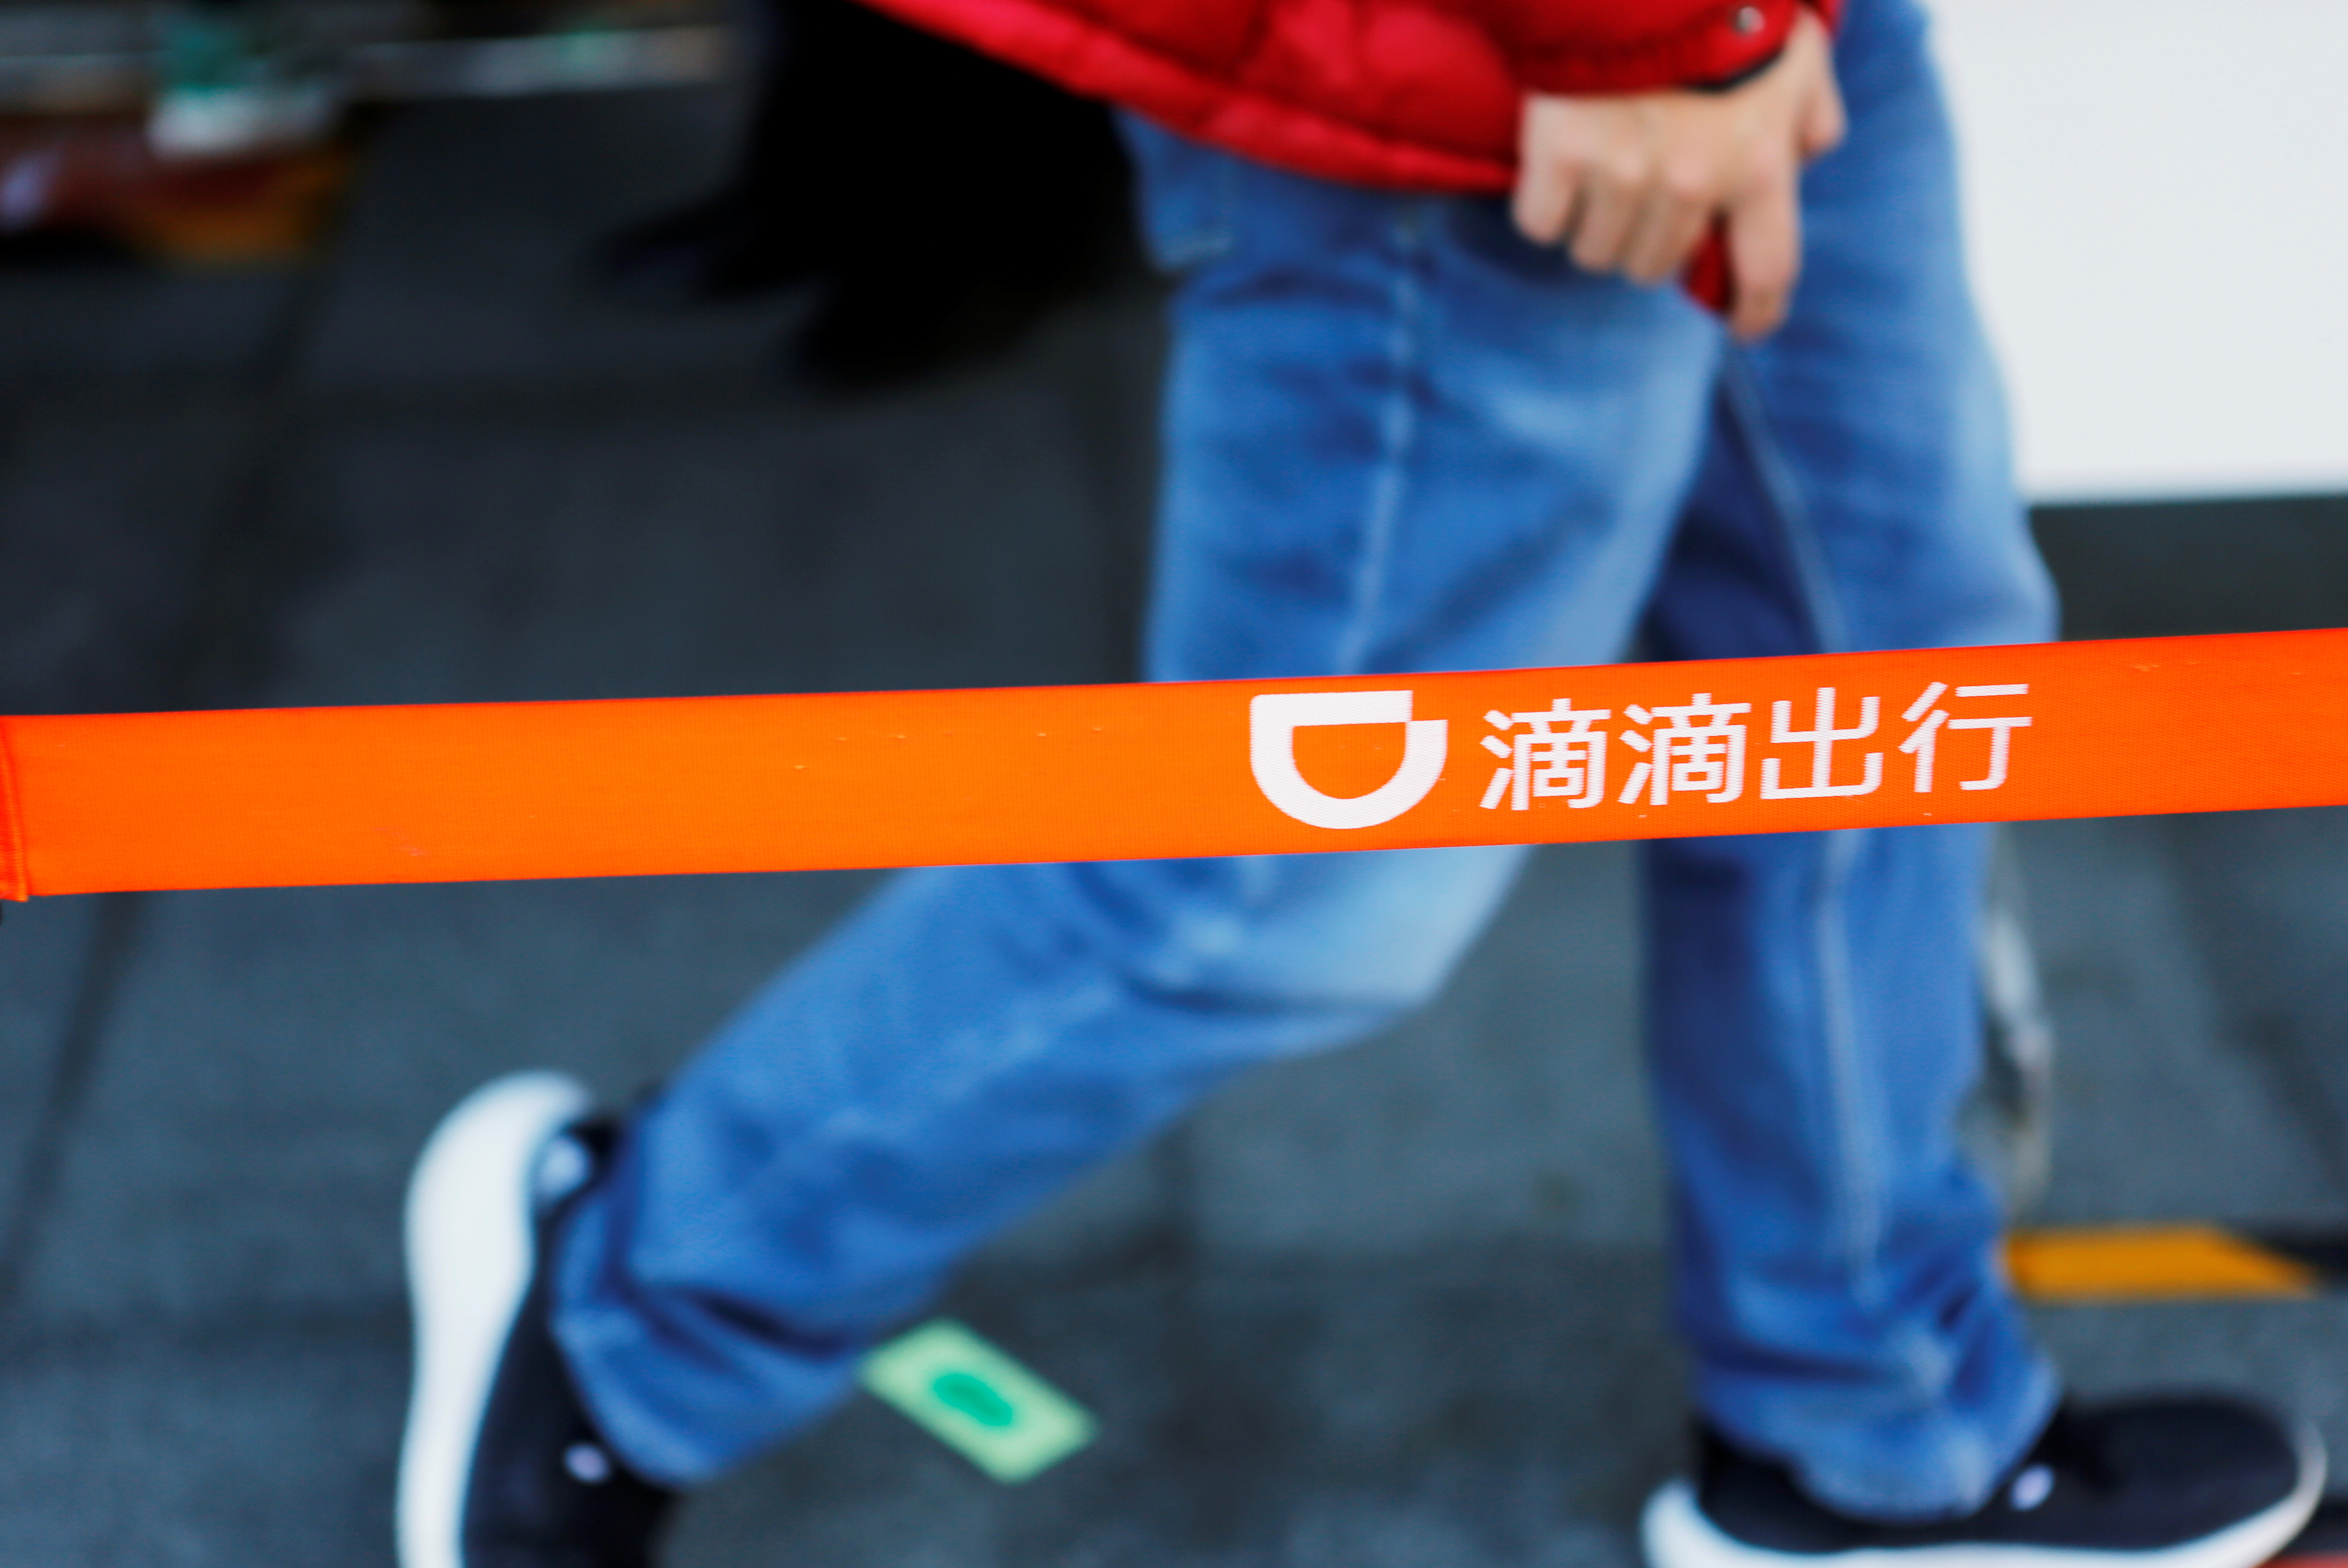 A man walks past a Didi logo at the headquarters of Didi Chuxing in Beijing, China November 20, 2020. REUTERS/Florence Lo/Files